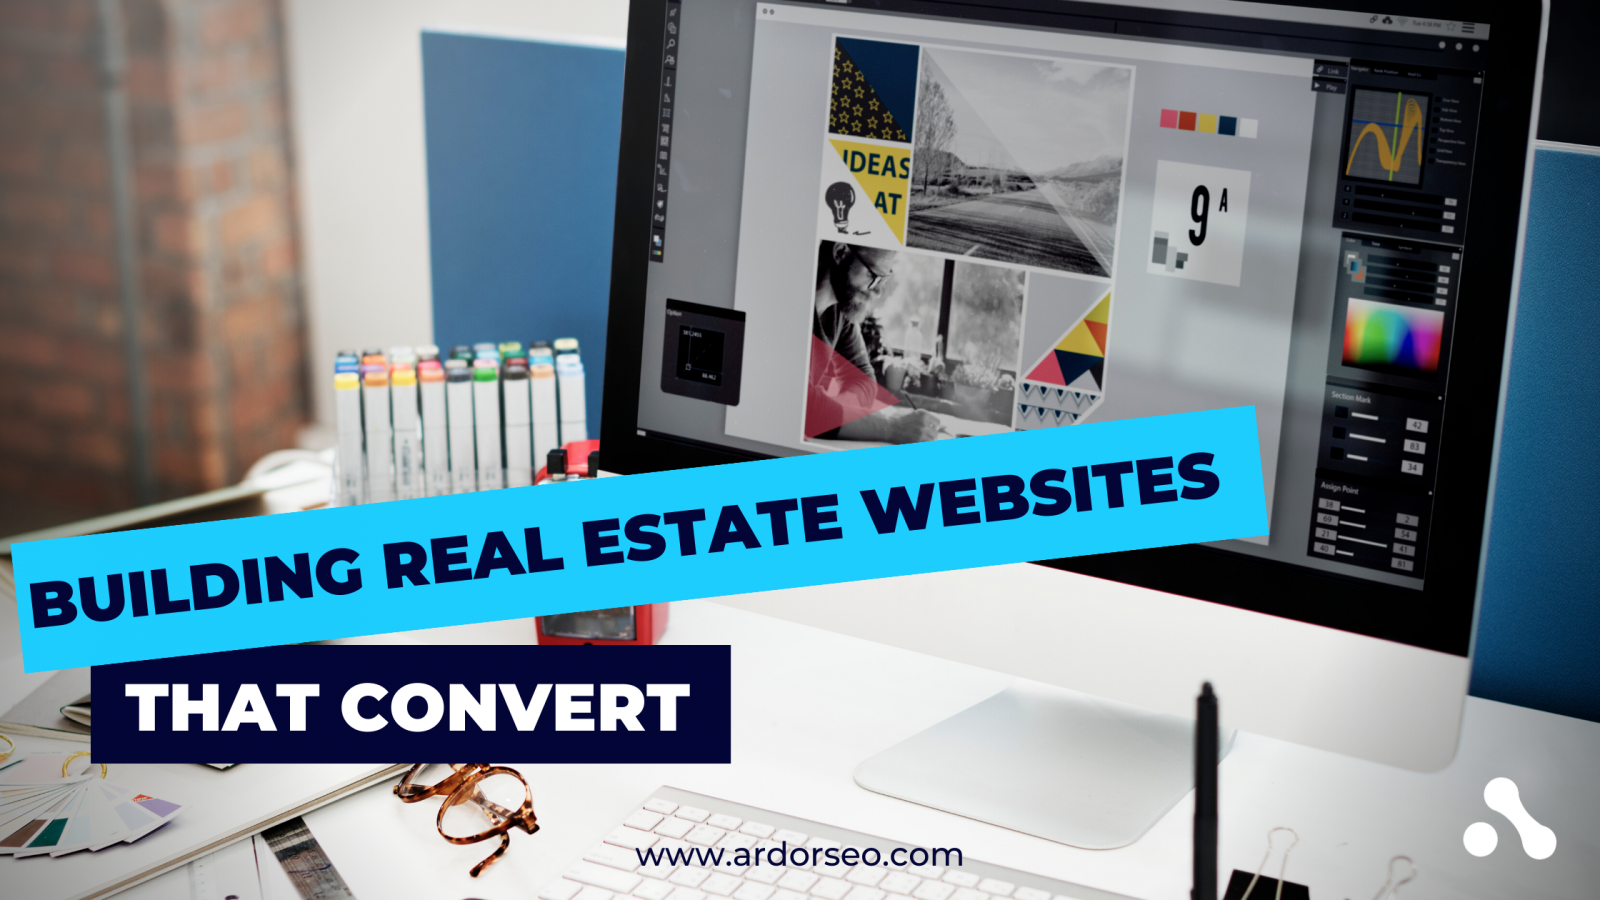 The real estate industry is competitive so make sure you stand out with these tips to make the best real estate websites.